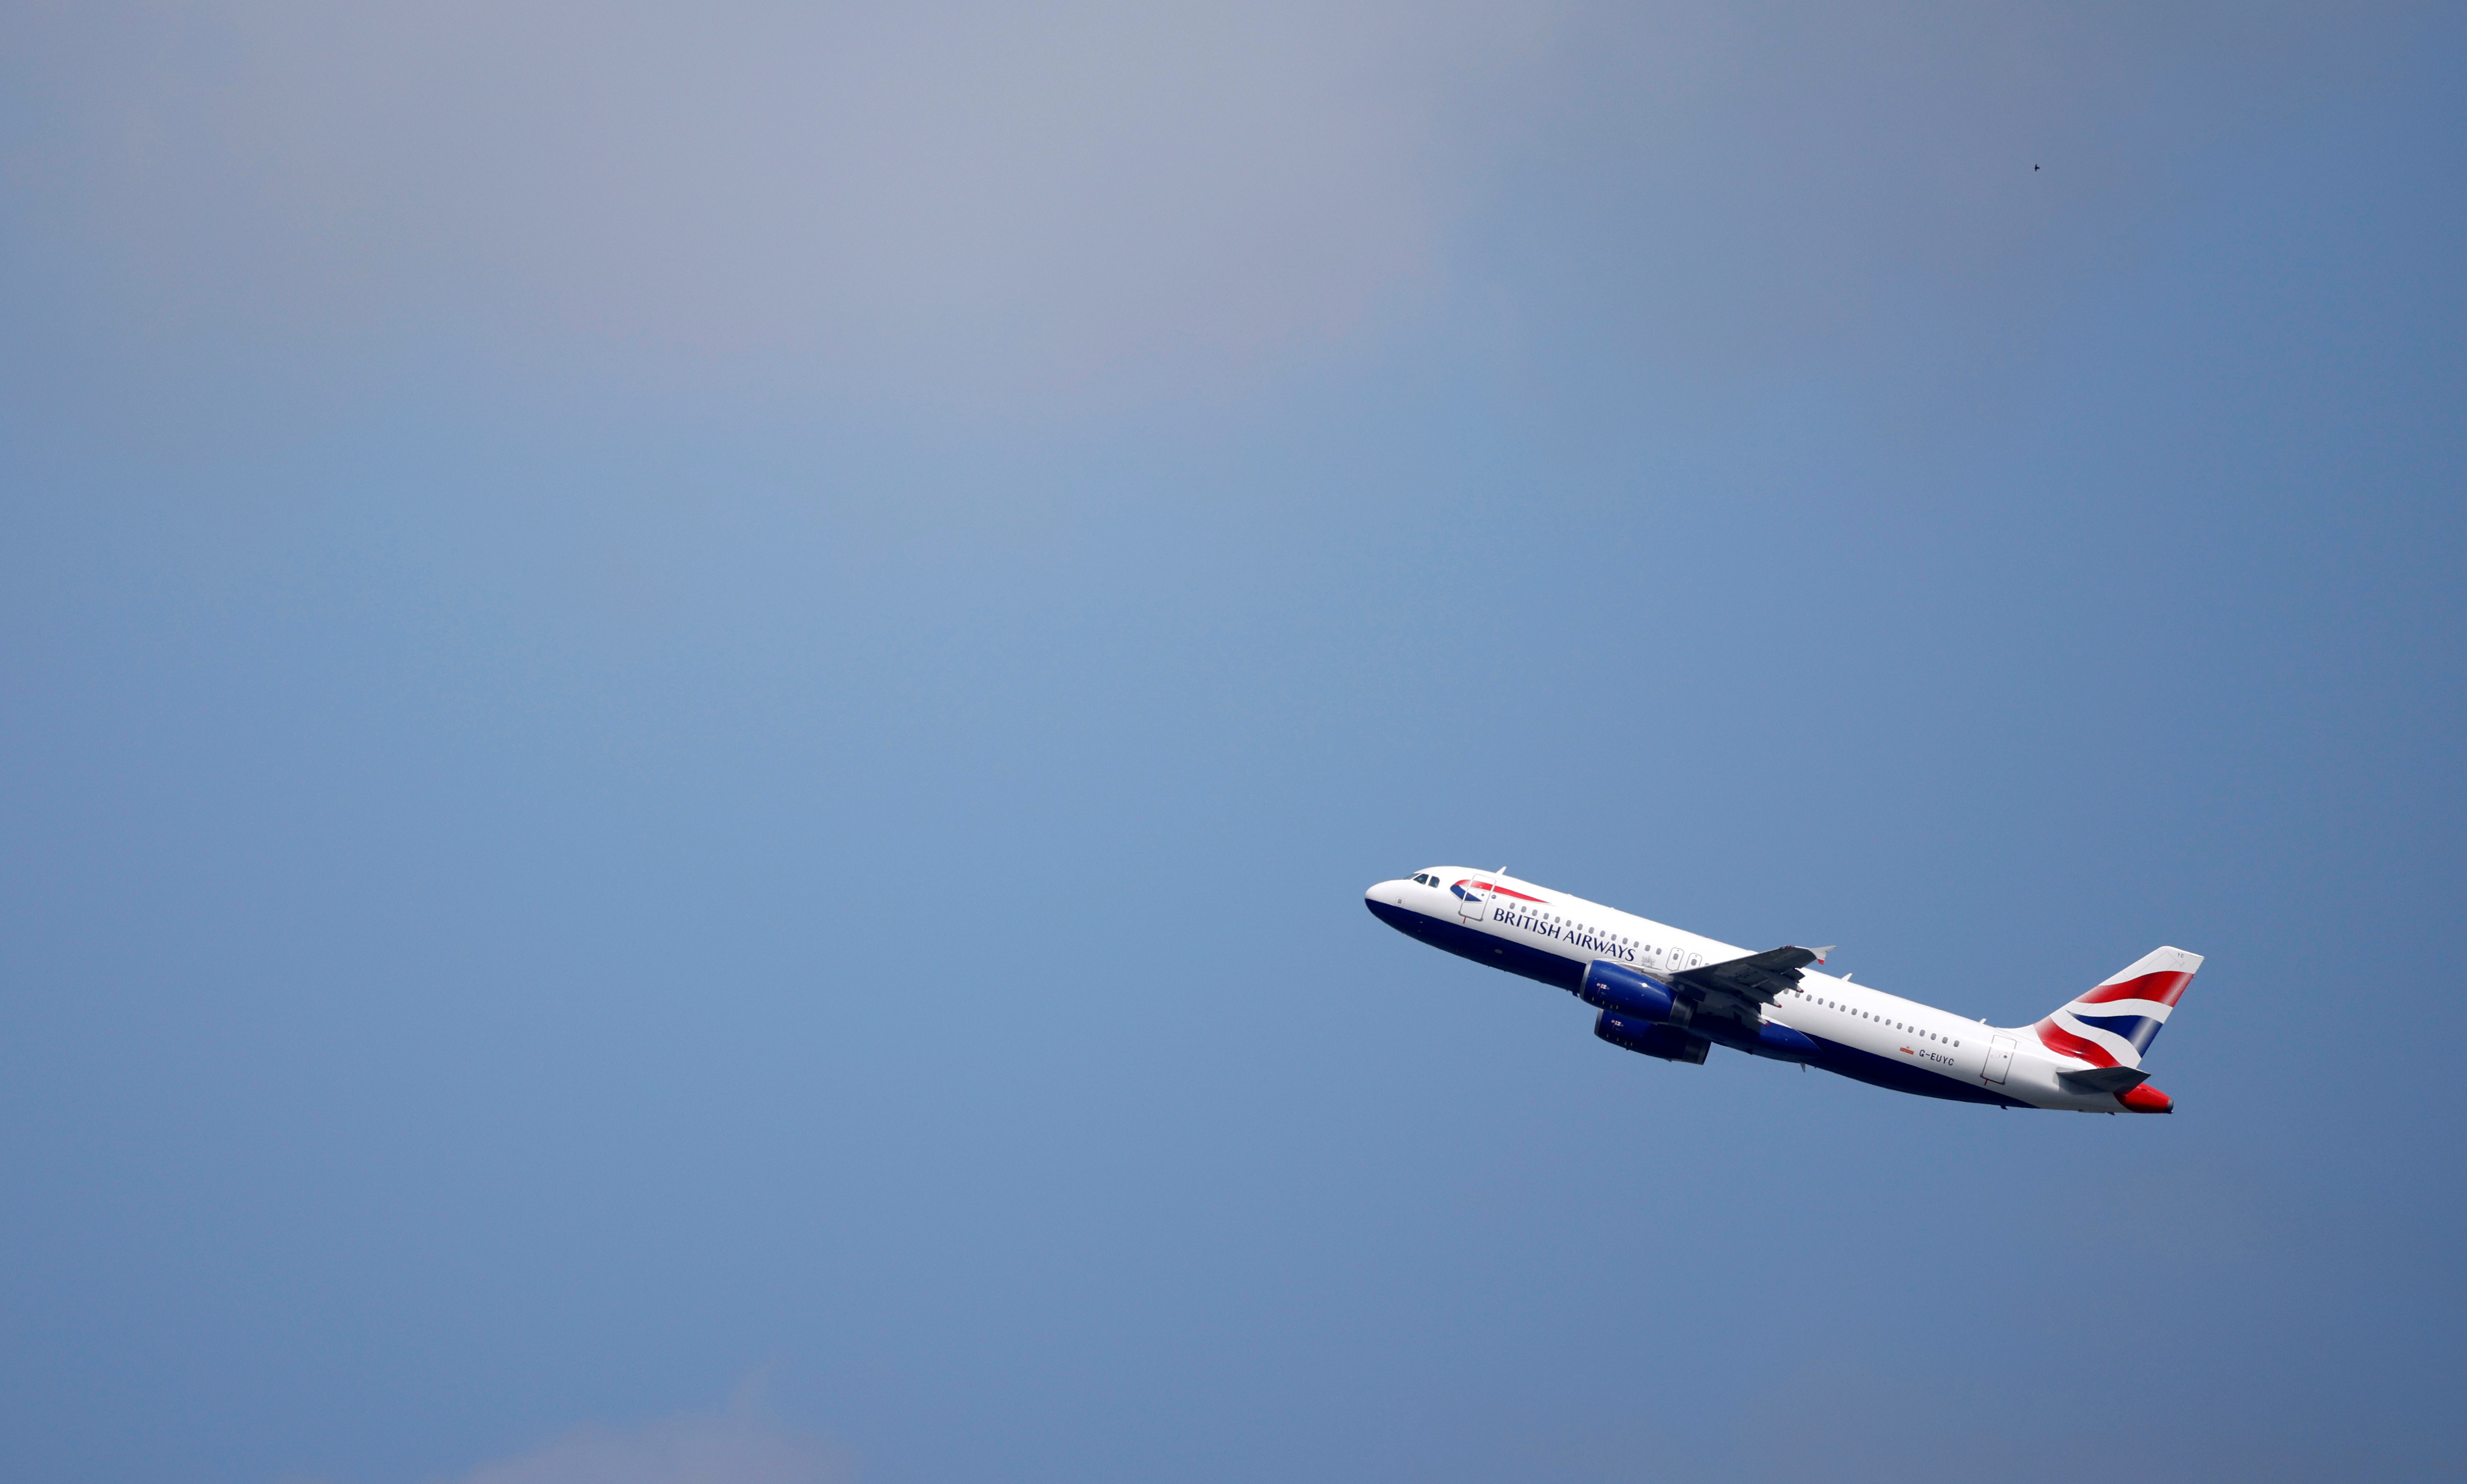 A BA Airbus A320 takes off from Heathrow Airport in London